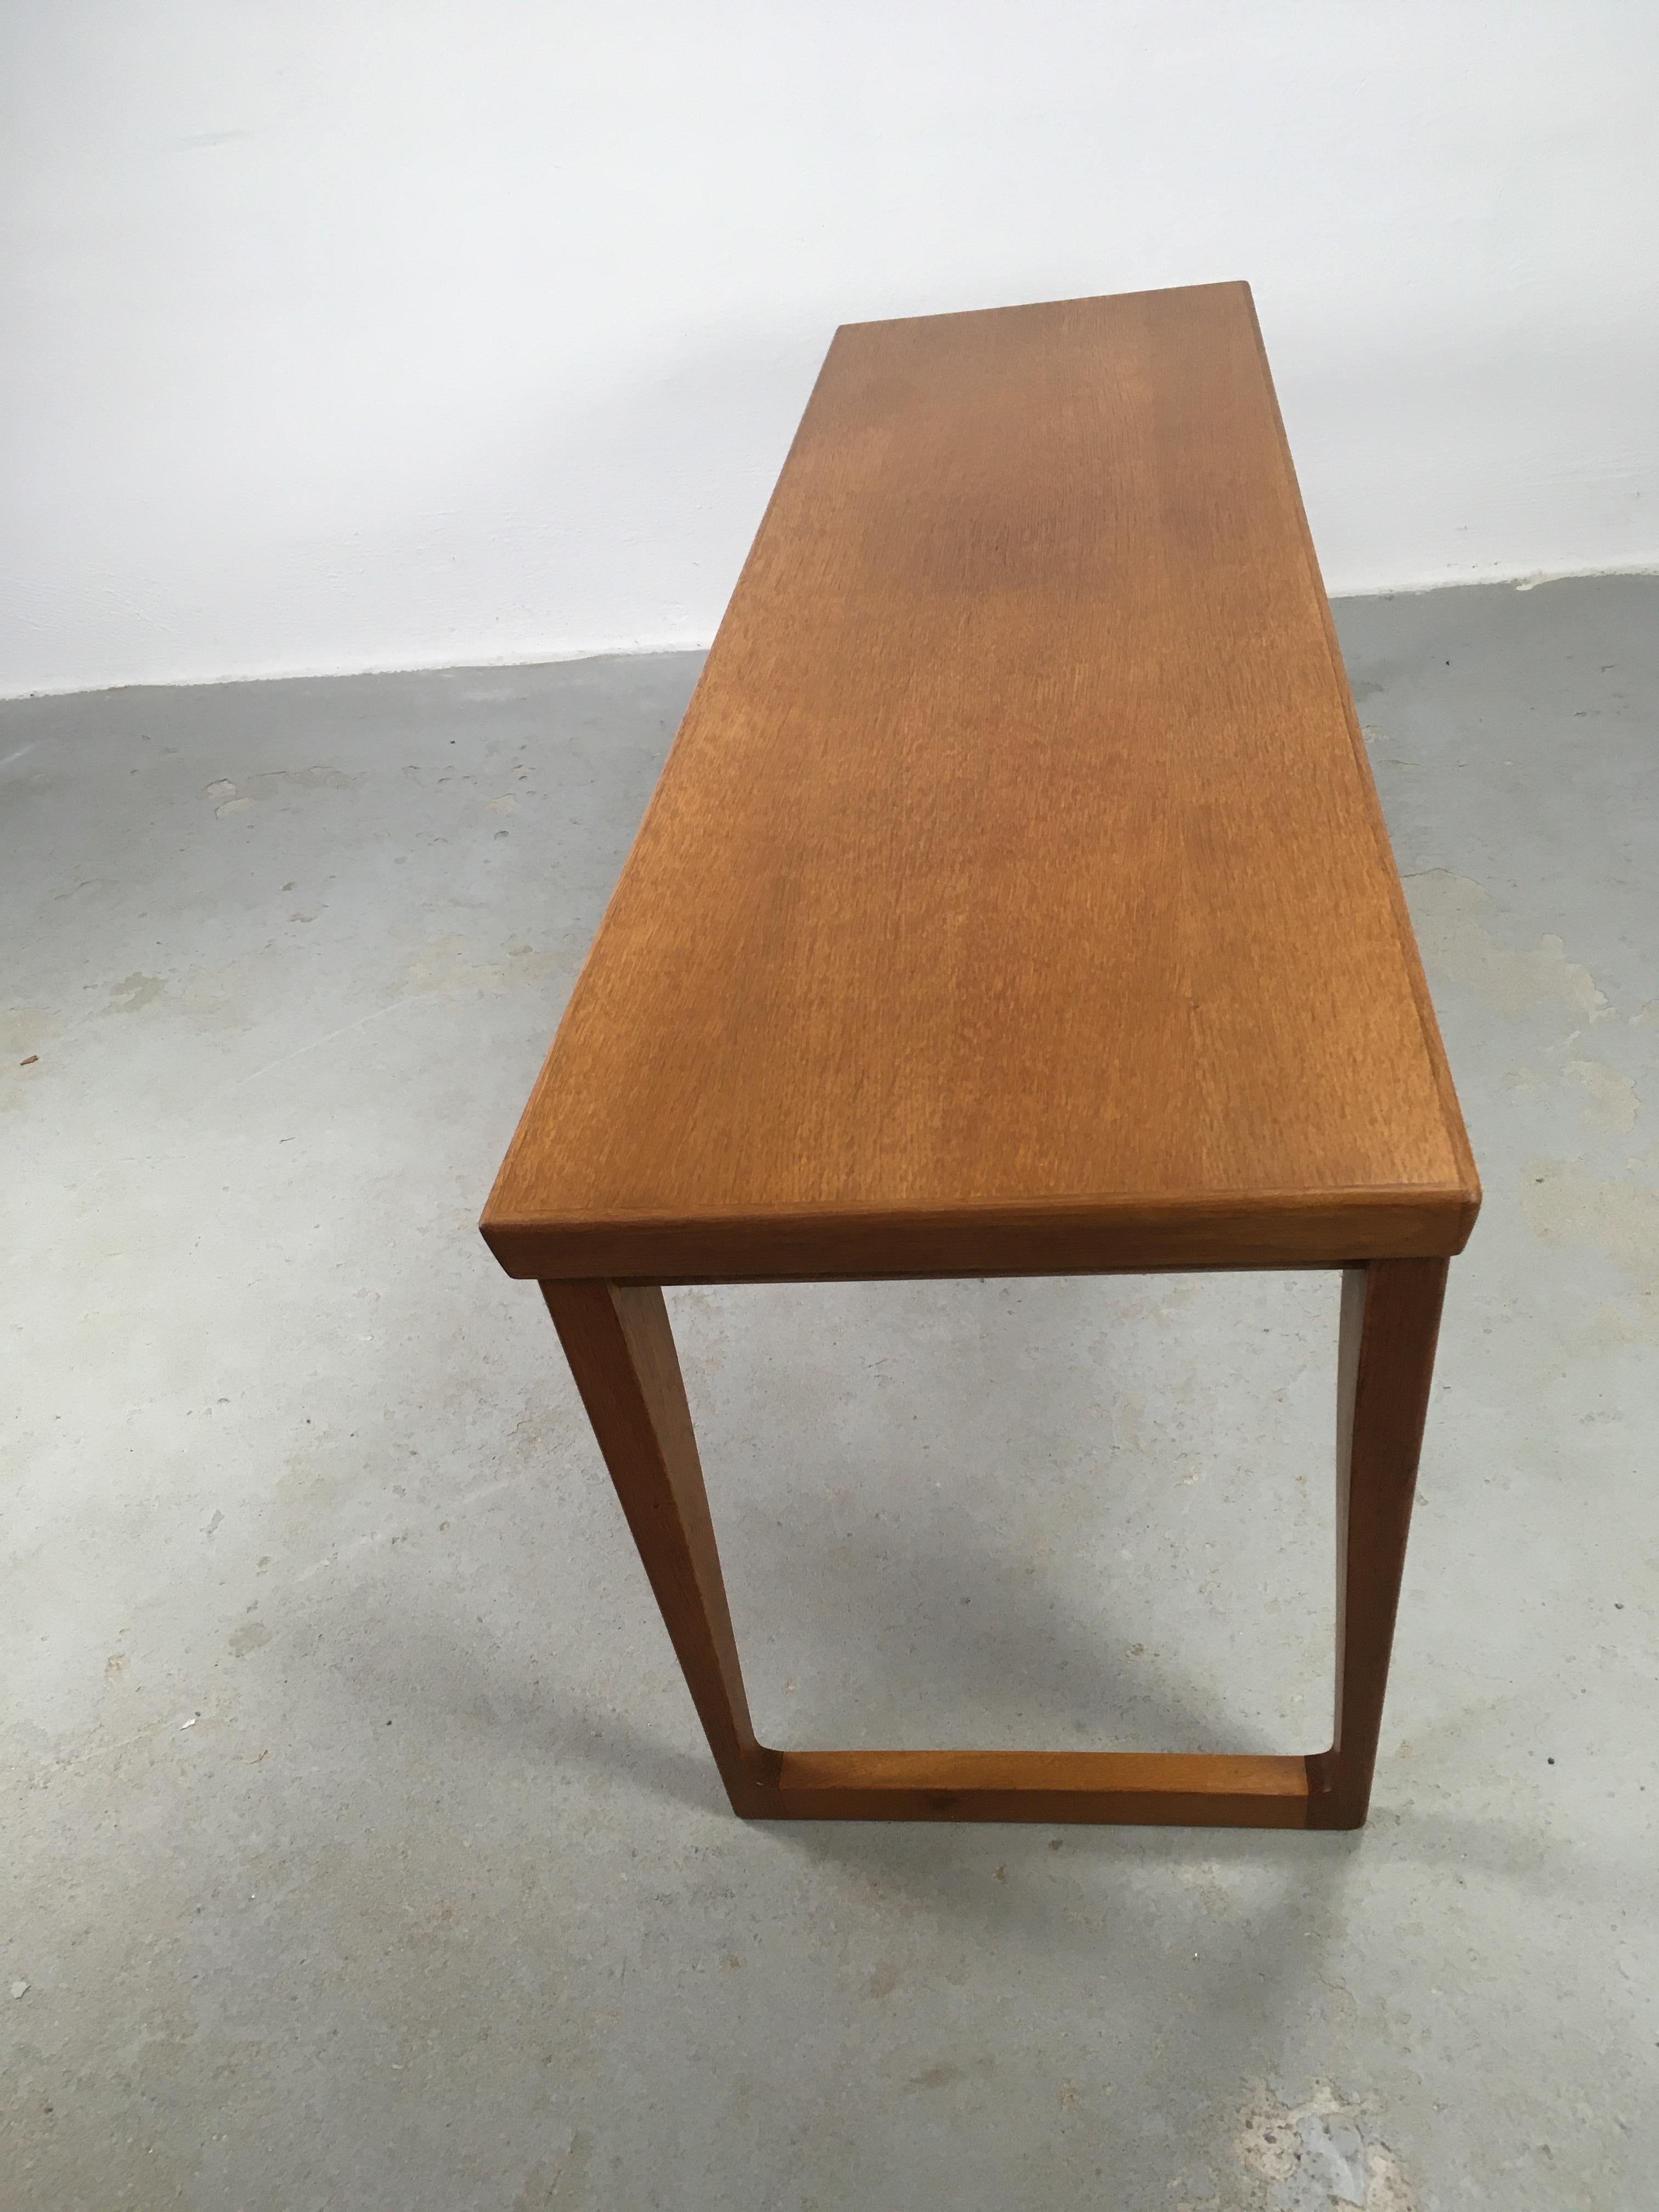 Restored and Refinished Kai Kristiansen Oak Side Table with Chest of Drawers For Sale 3